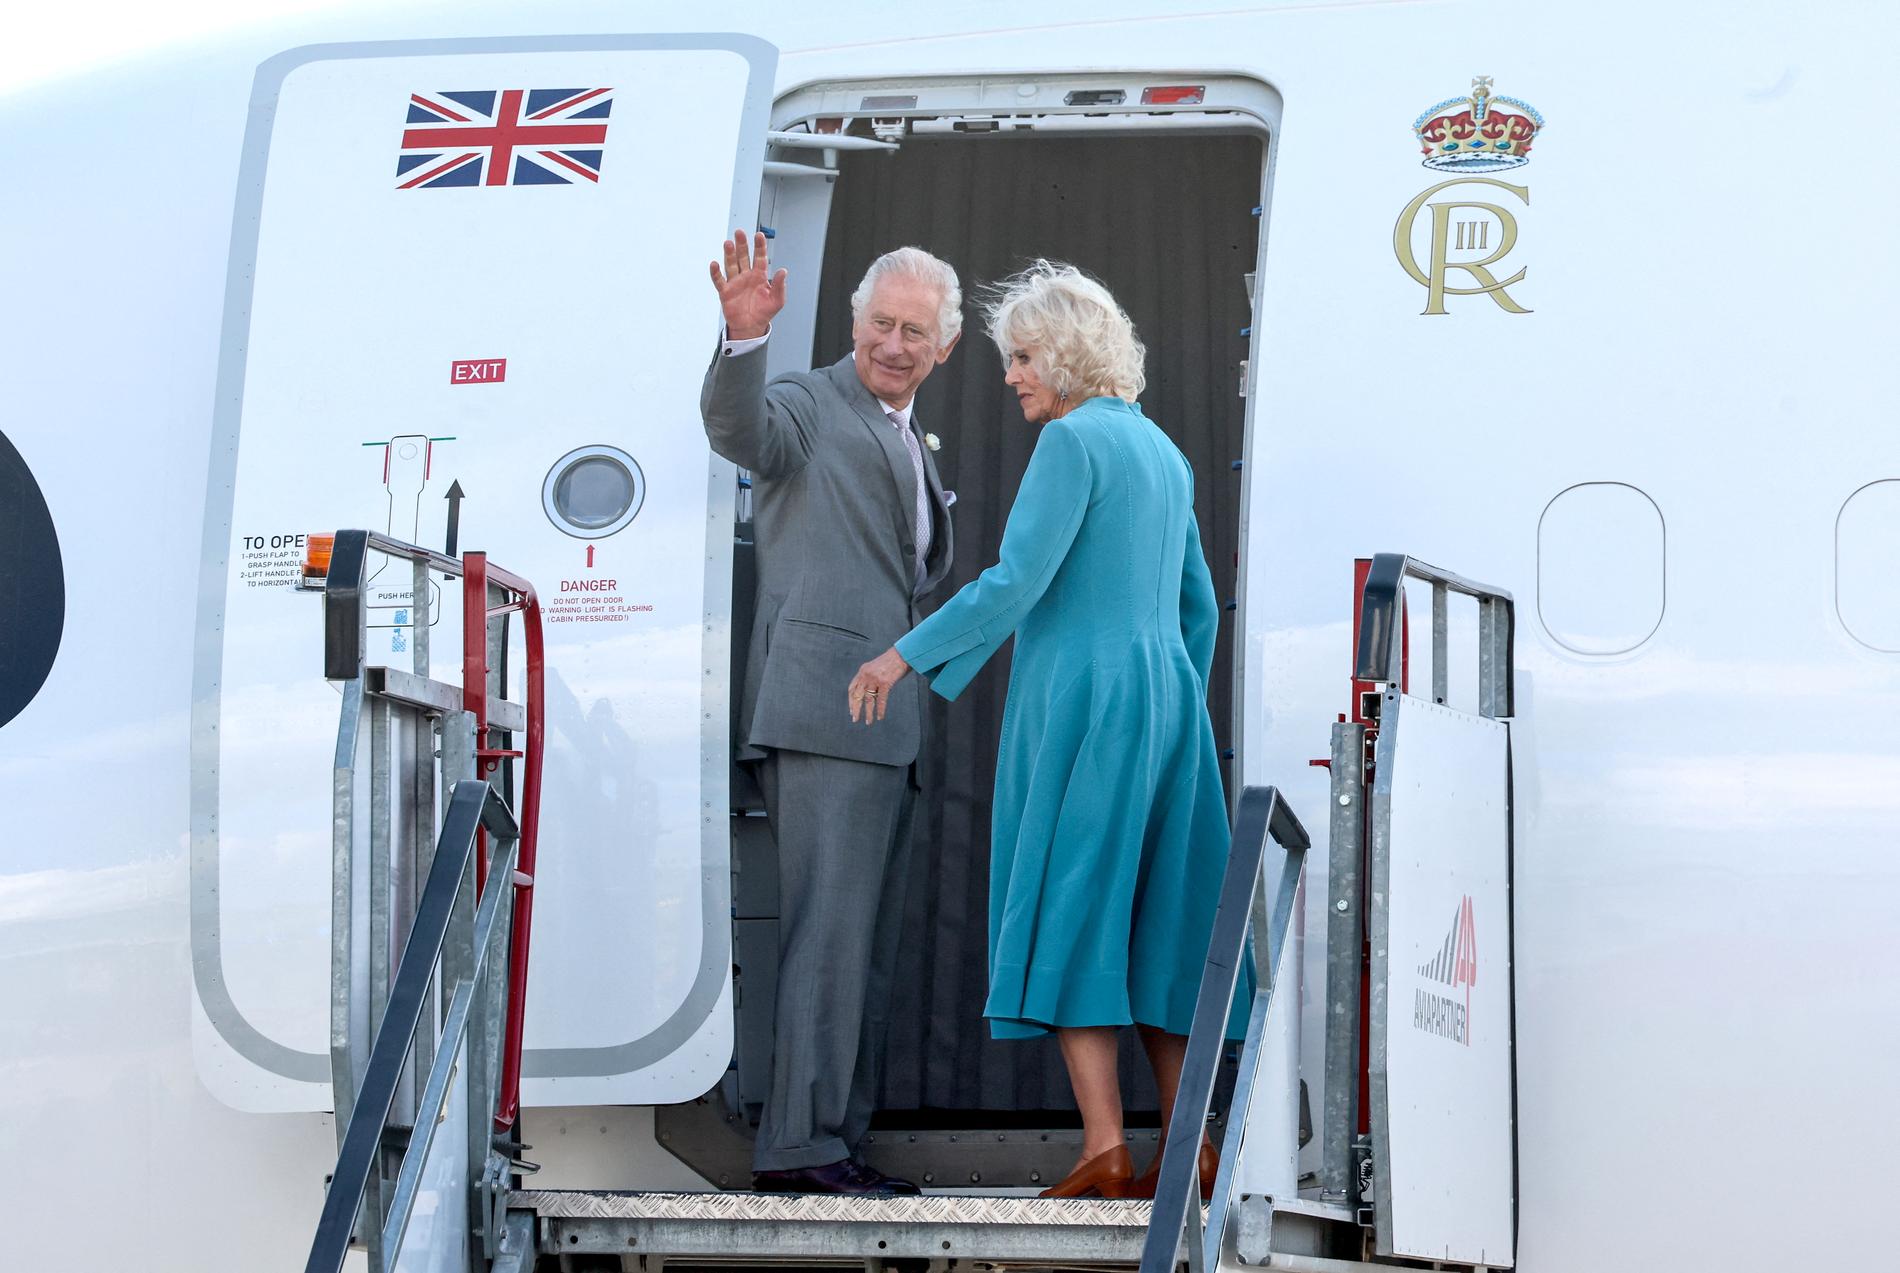 Departure: The royal couple waves to photographers from the plane at Bordeaux-Mérignac Airport on Friday evening.